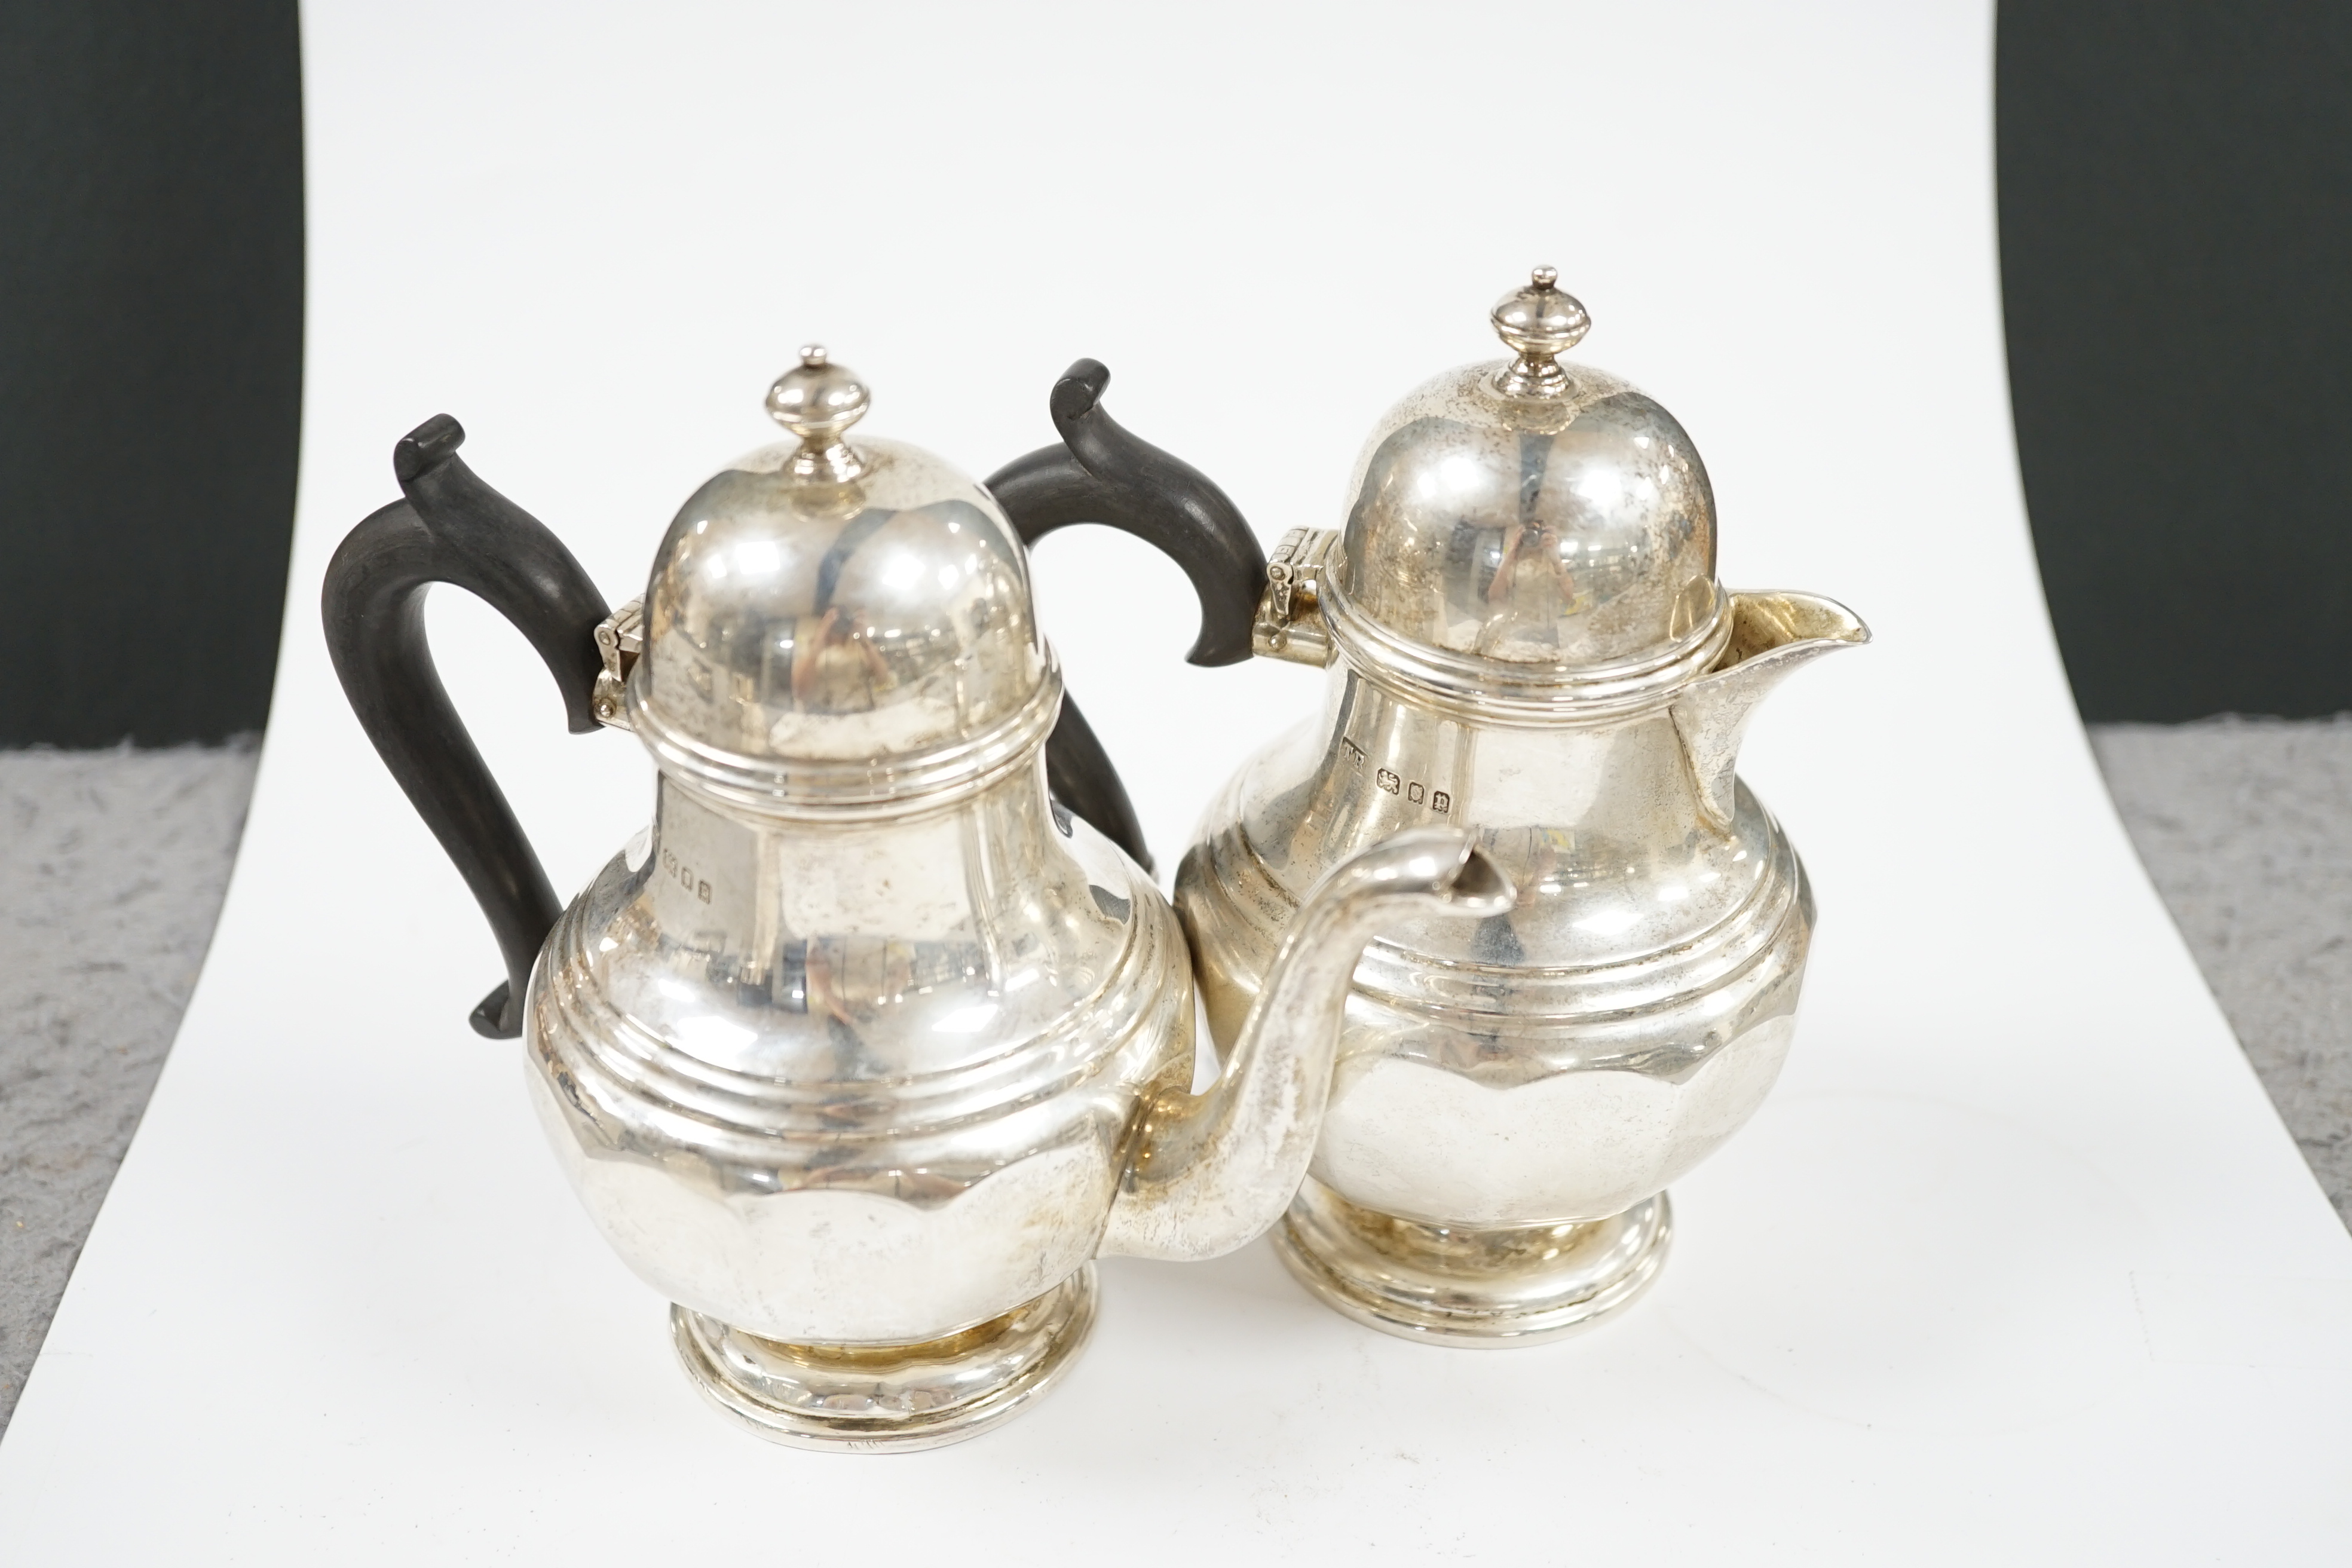 A George V silver bachelors pear shaped café au lait pair, by Theodore Rossi, London, 1930 and an earlier silver tea caddy, gross weight 18.5oz. Condition - poor to fair